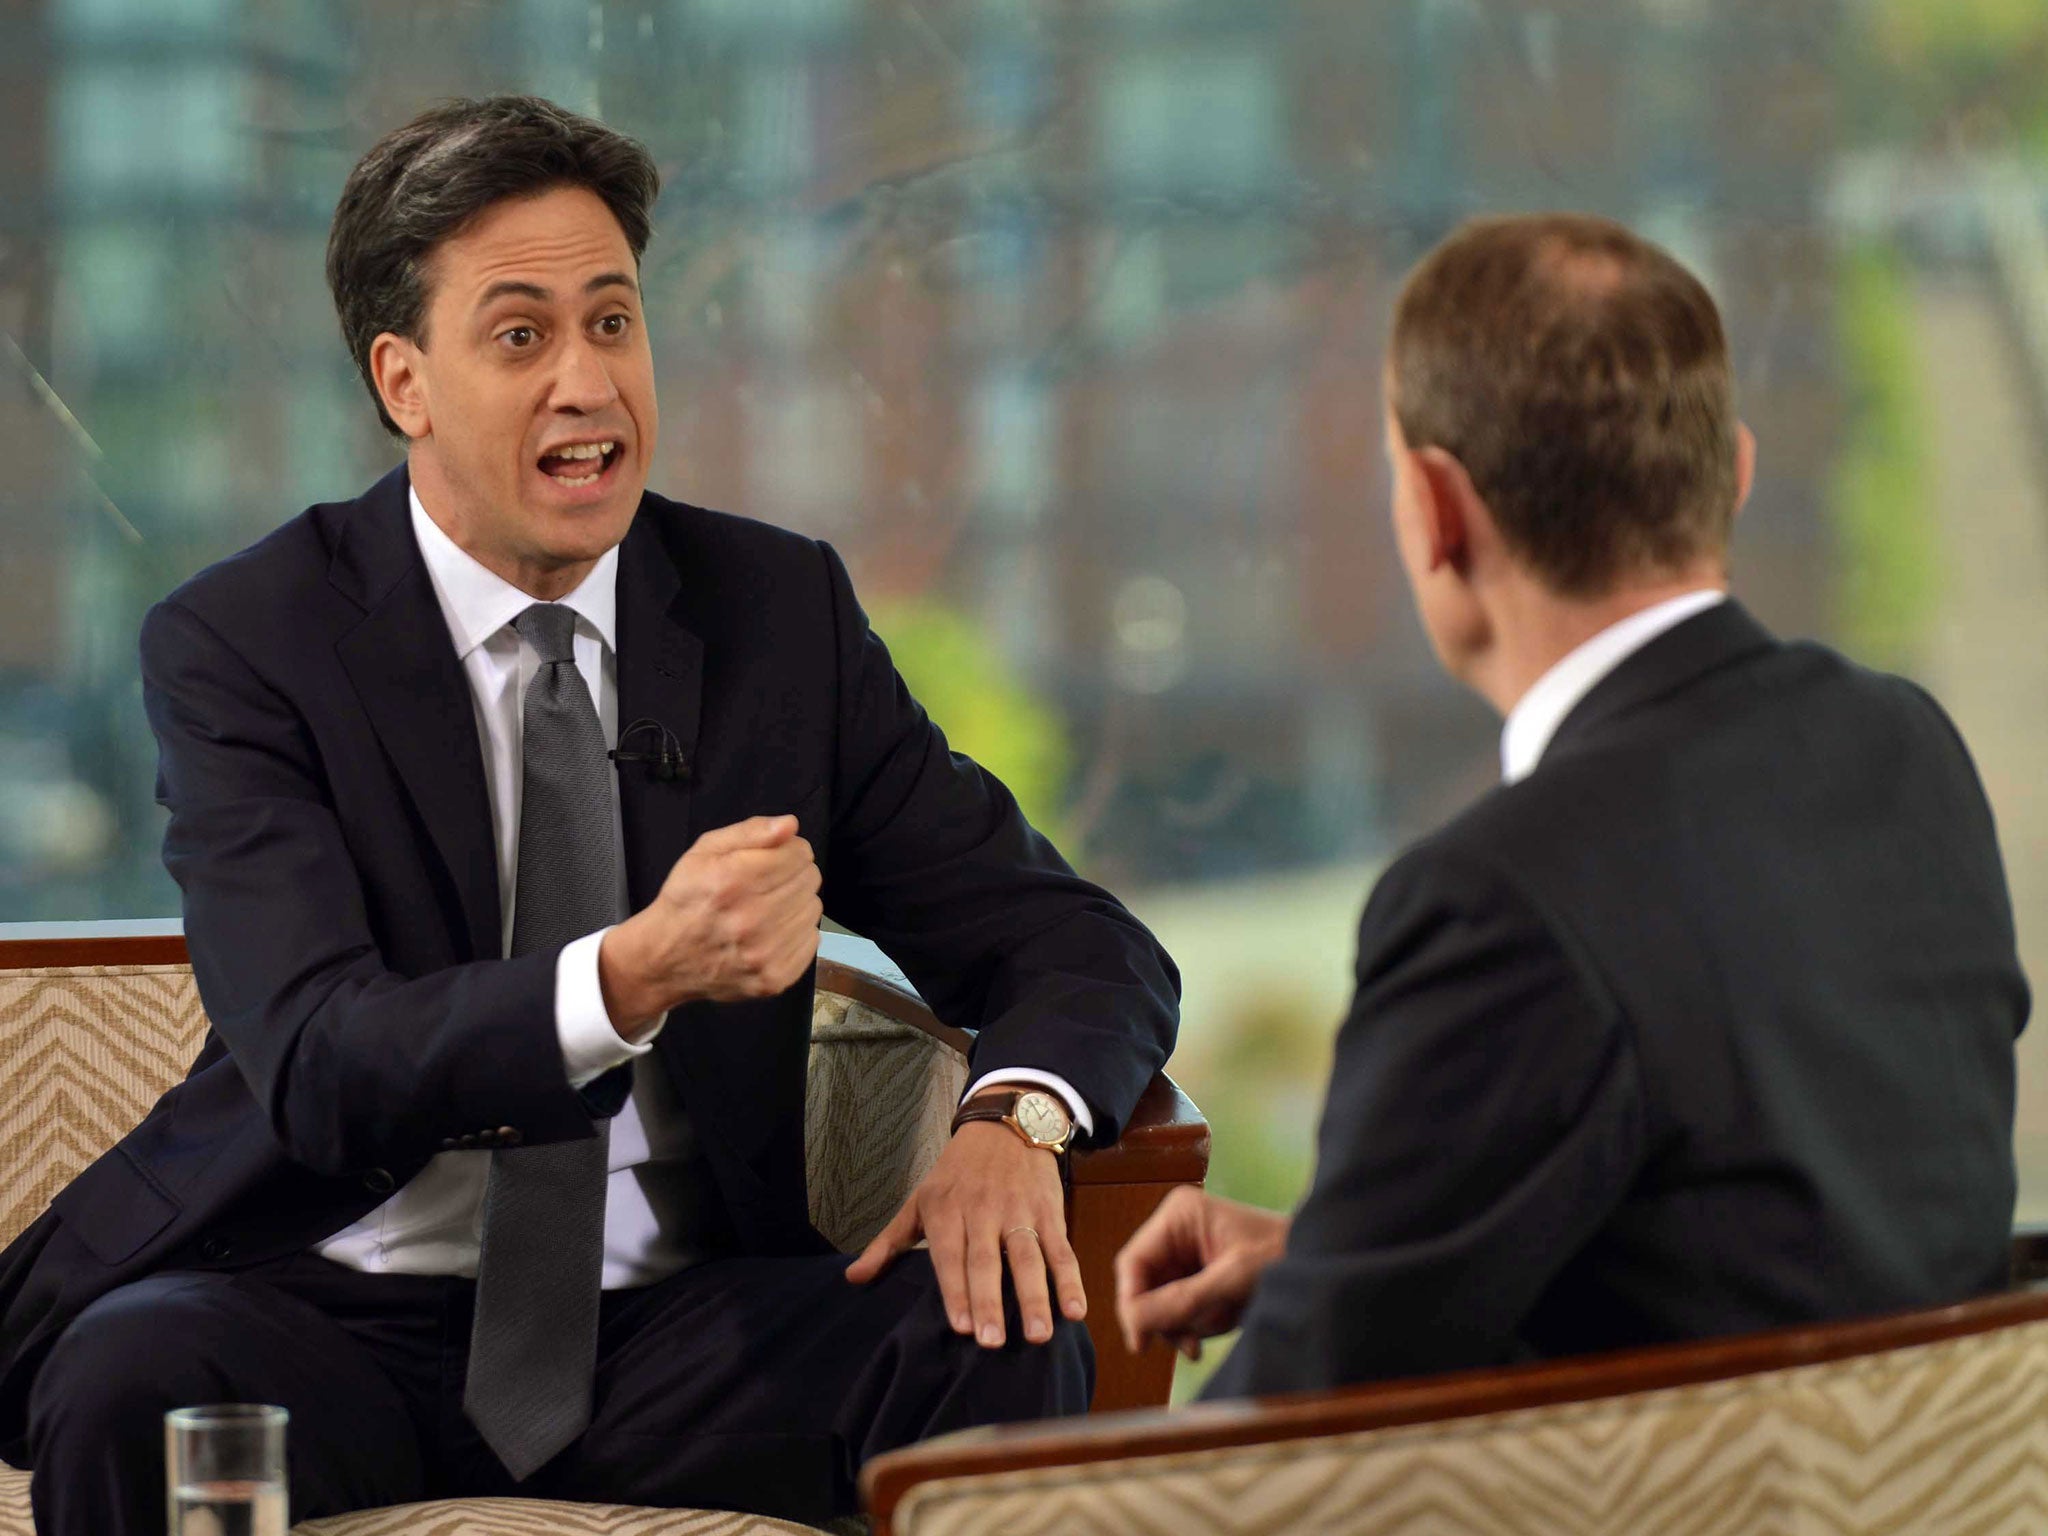 Labour leader Ed Miliband during his appearance on the BBC current affairs programme, The Andrew Marr Show